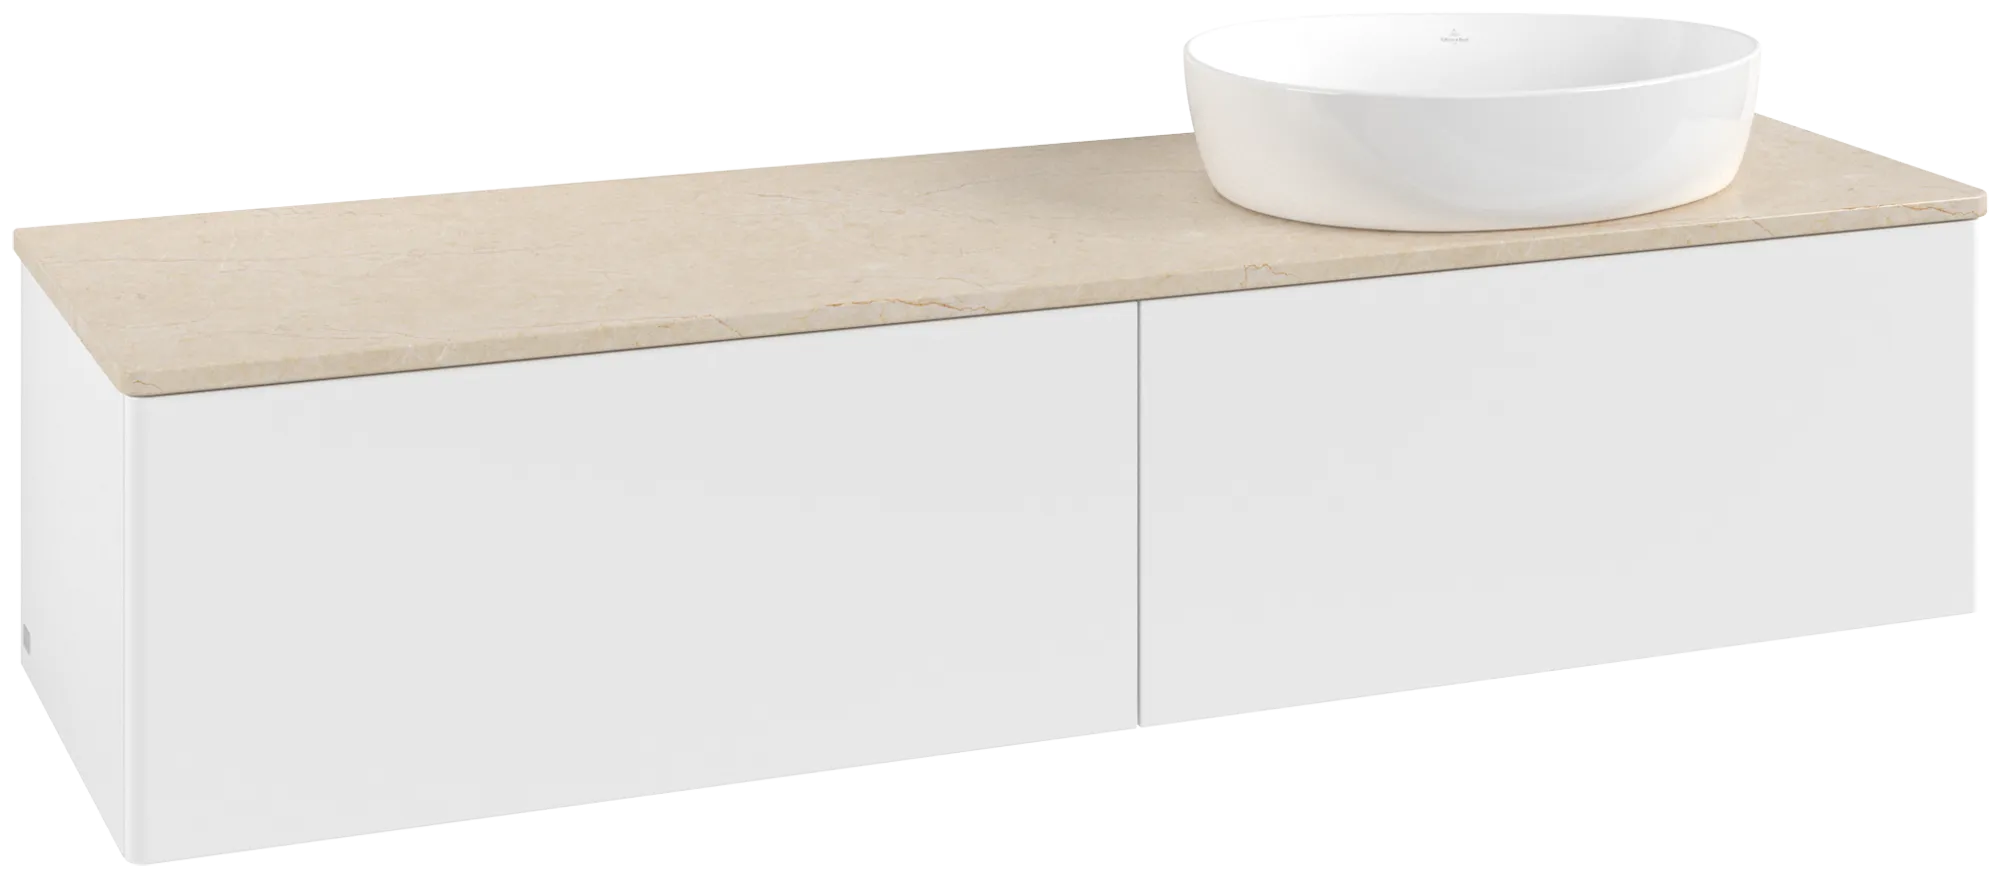 VILLEROY BOCH Antao Vanity unit, 2 pull-out compartments, 1600 x 360 x 500 mm, Front without structure, White Matt Lacquer / Botticino #K38013MT resmi